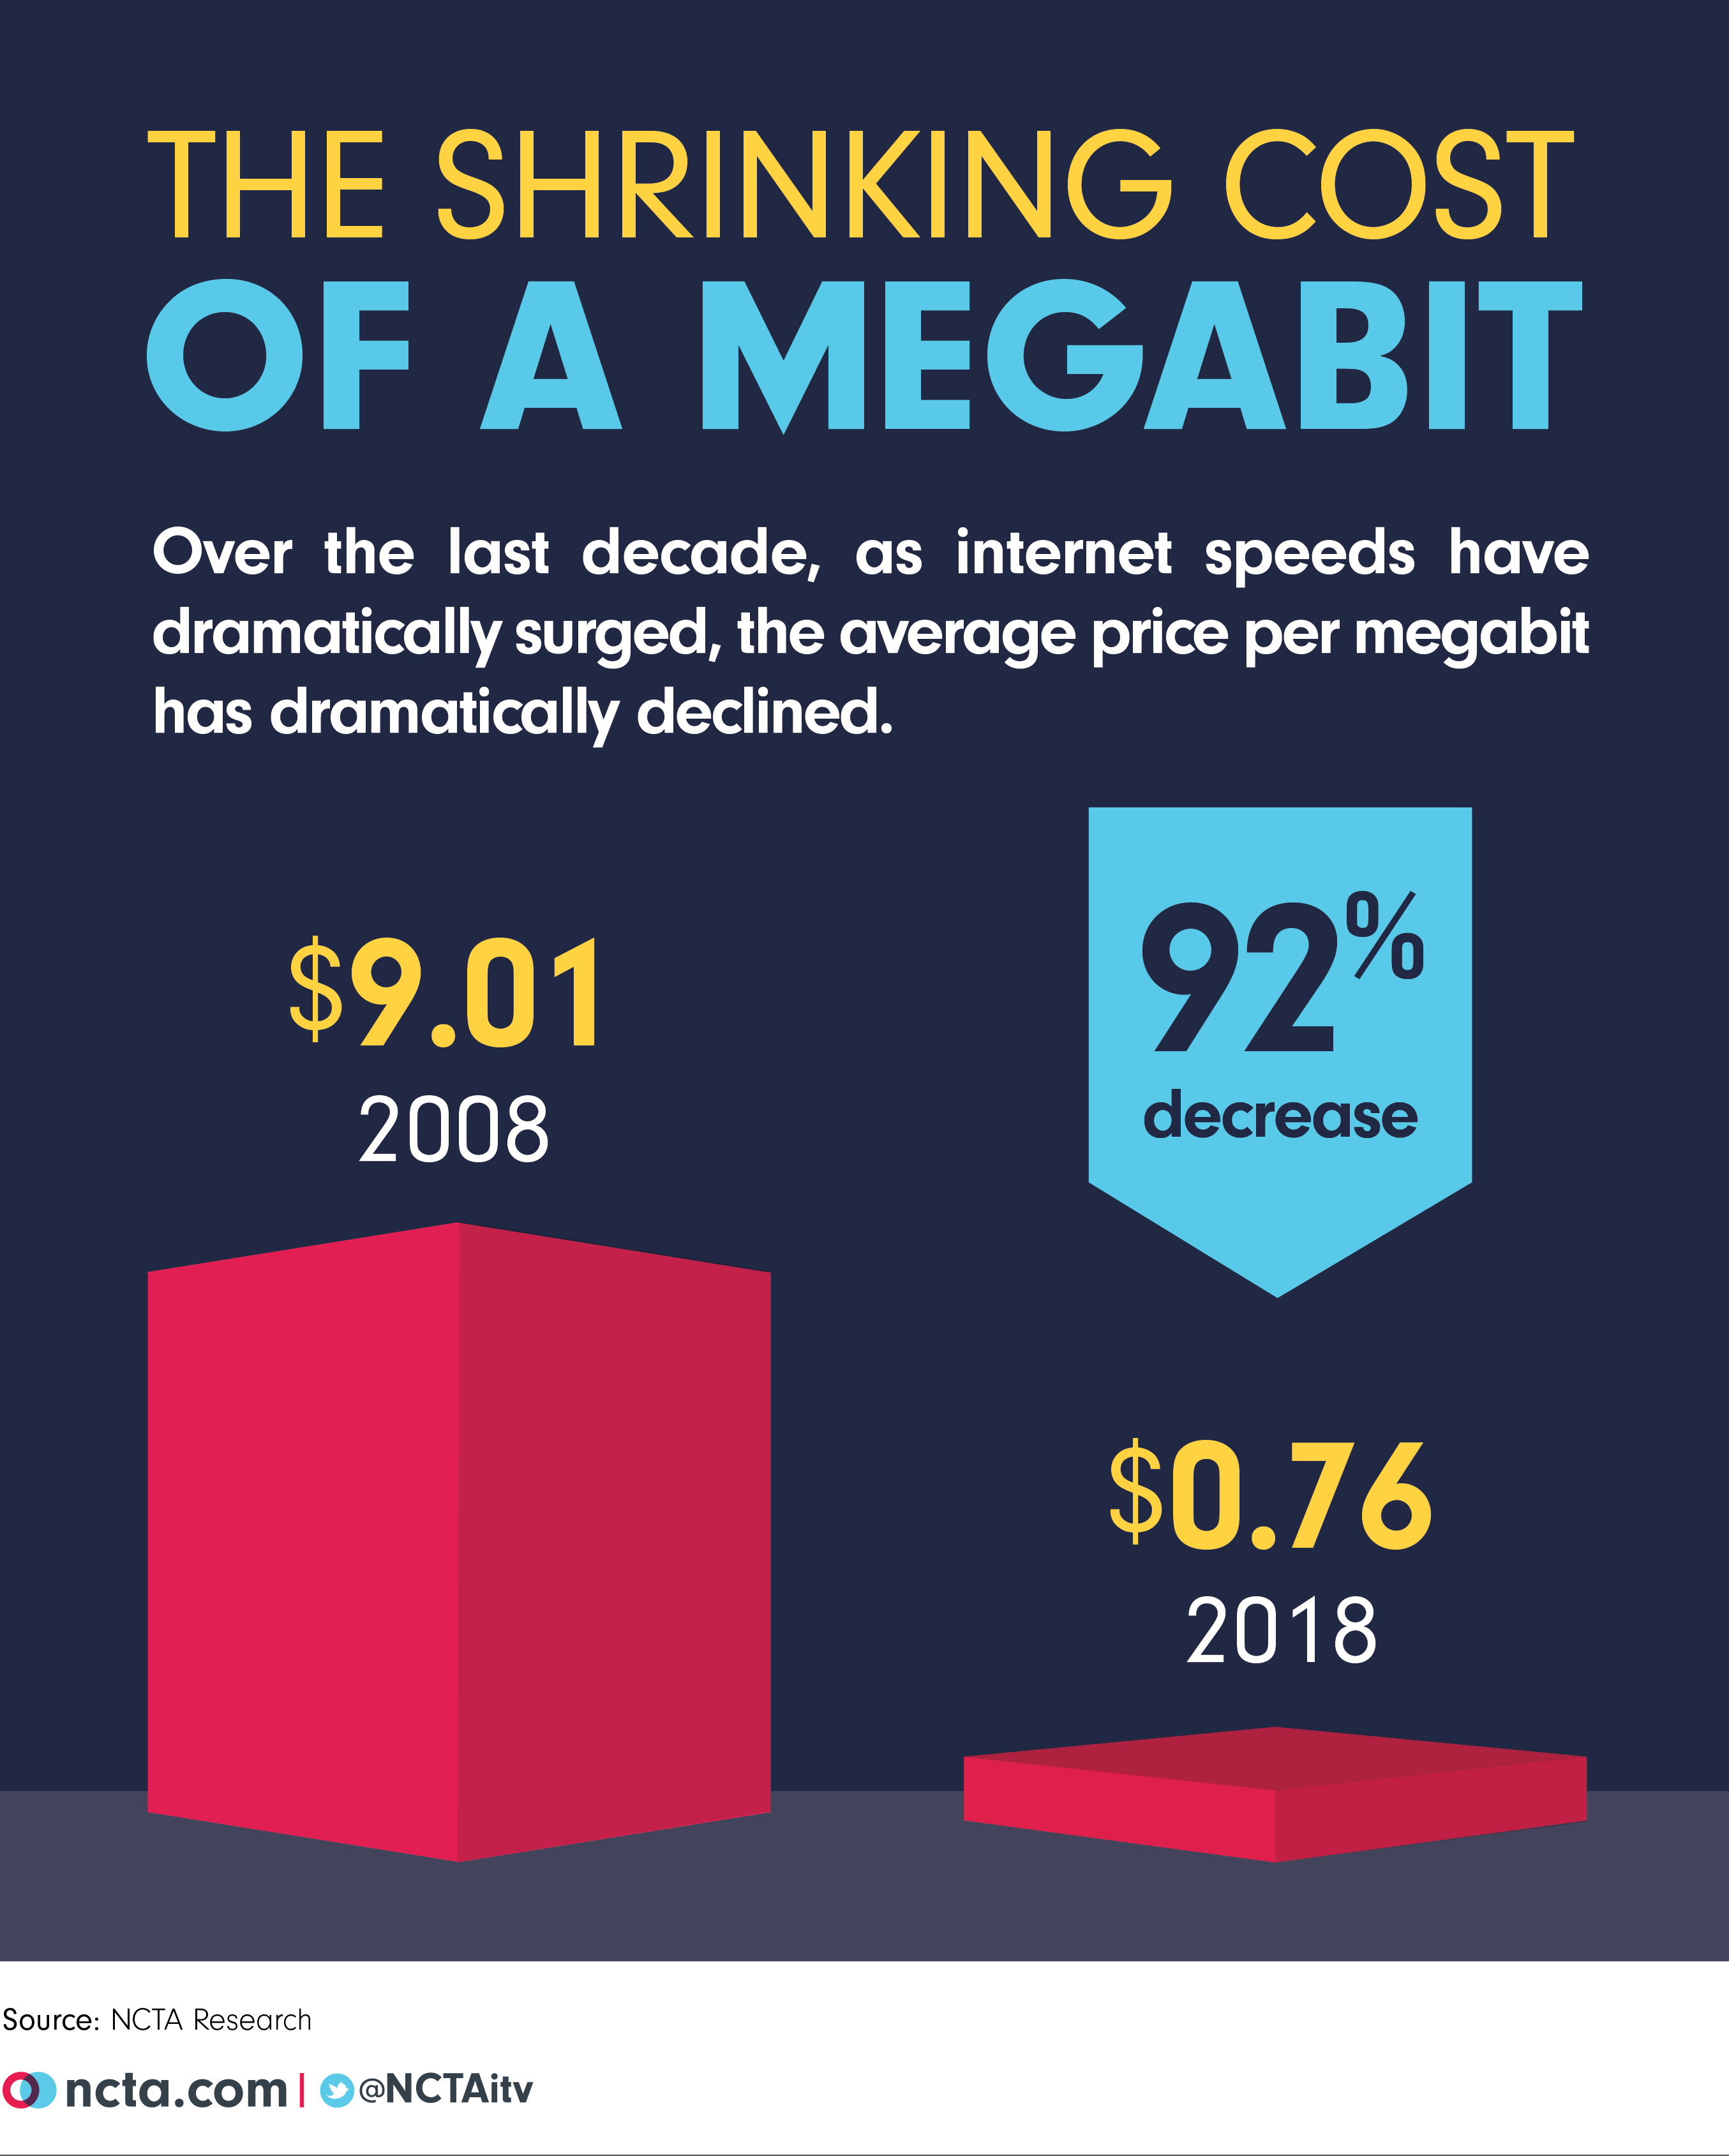 The shrinking cost of a megabit